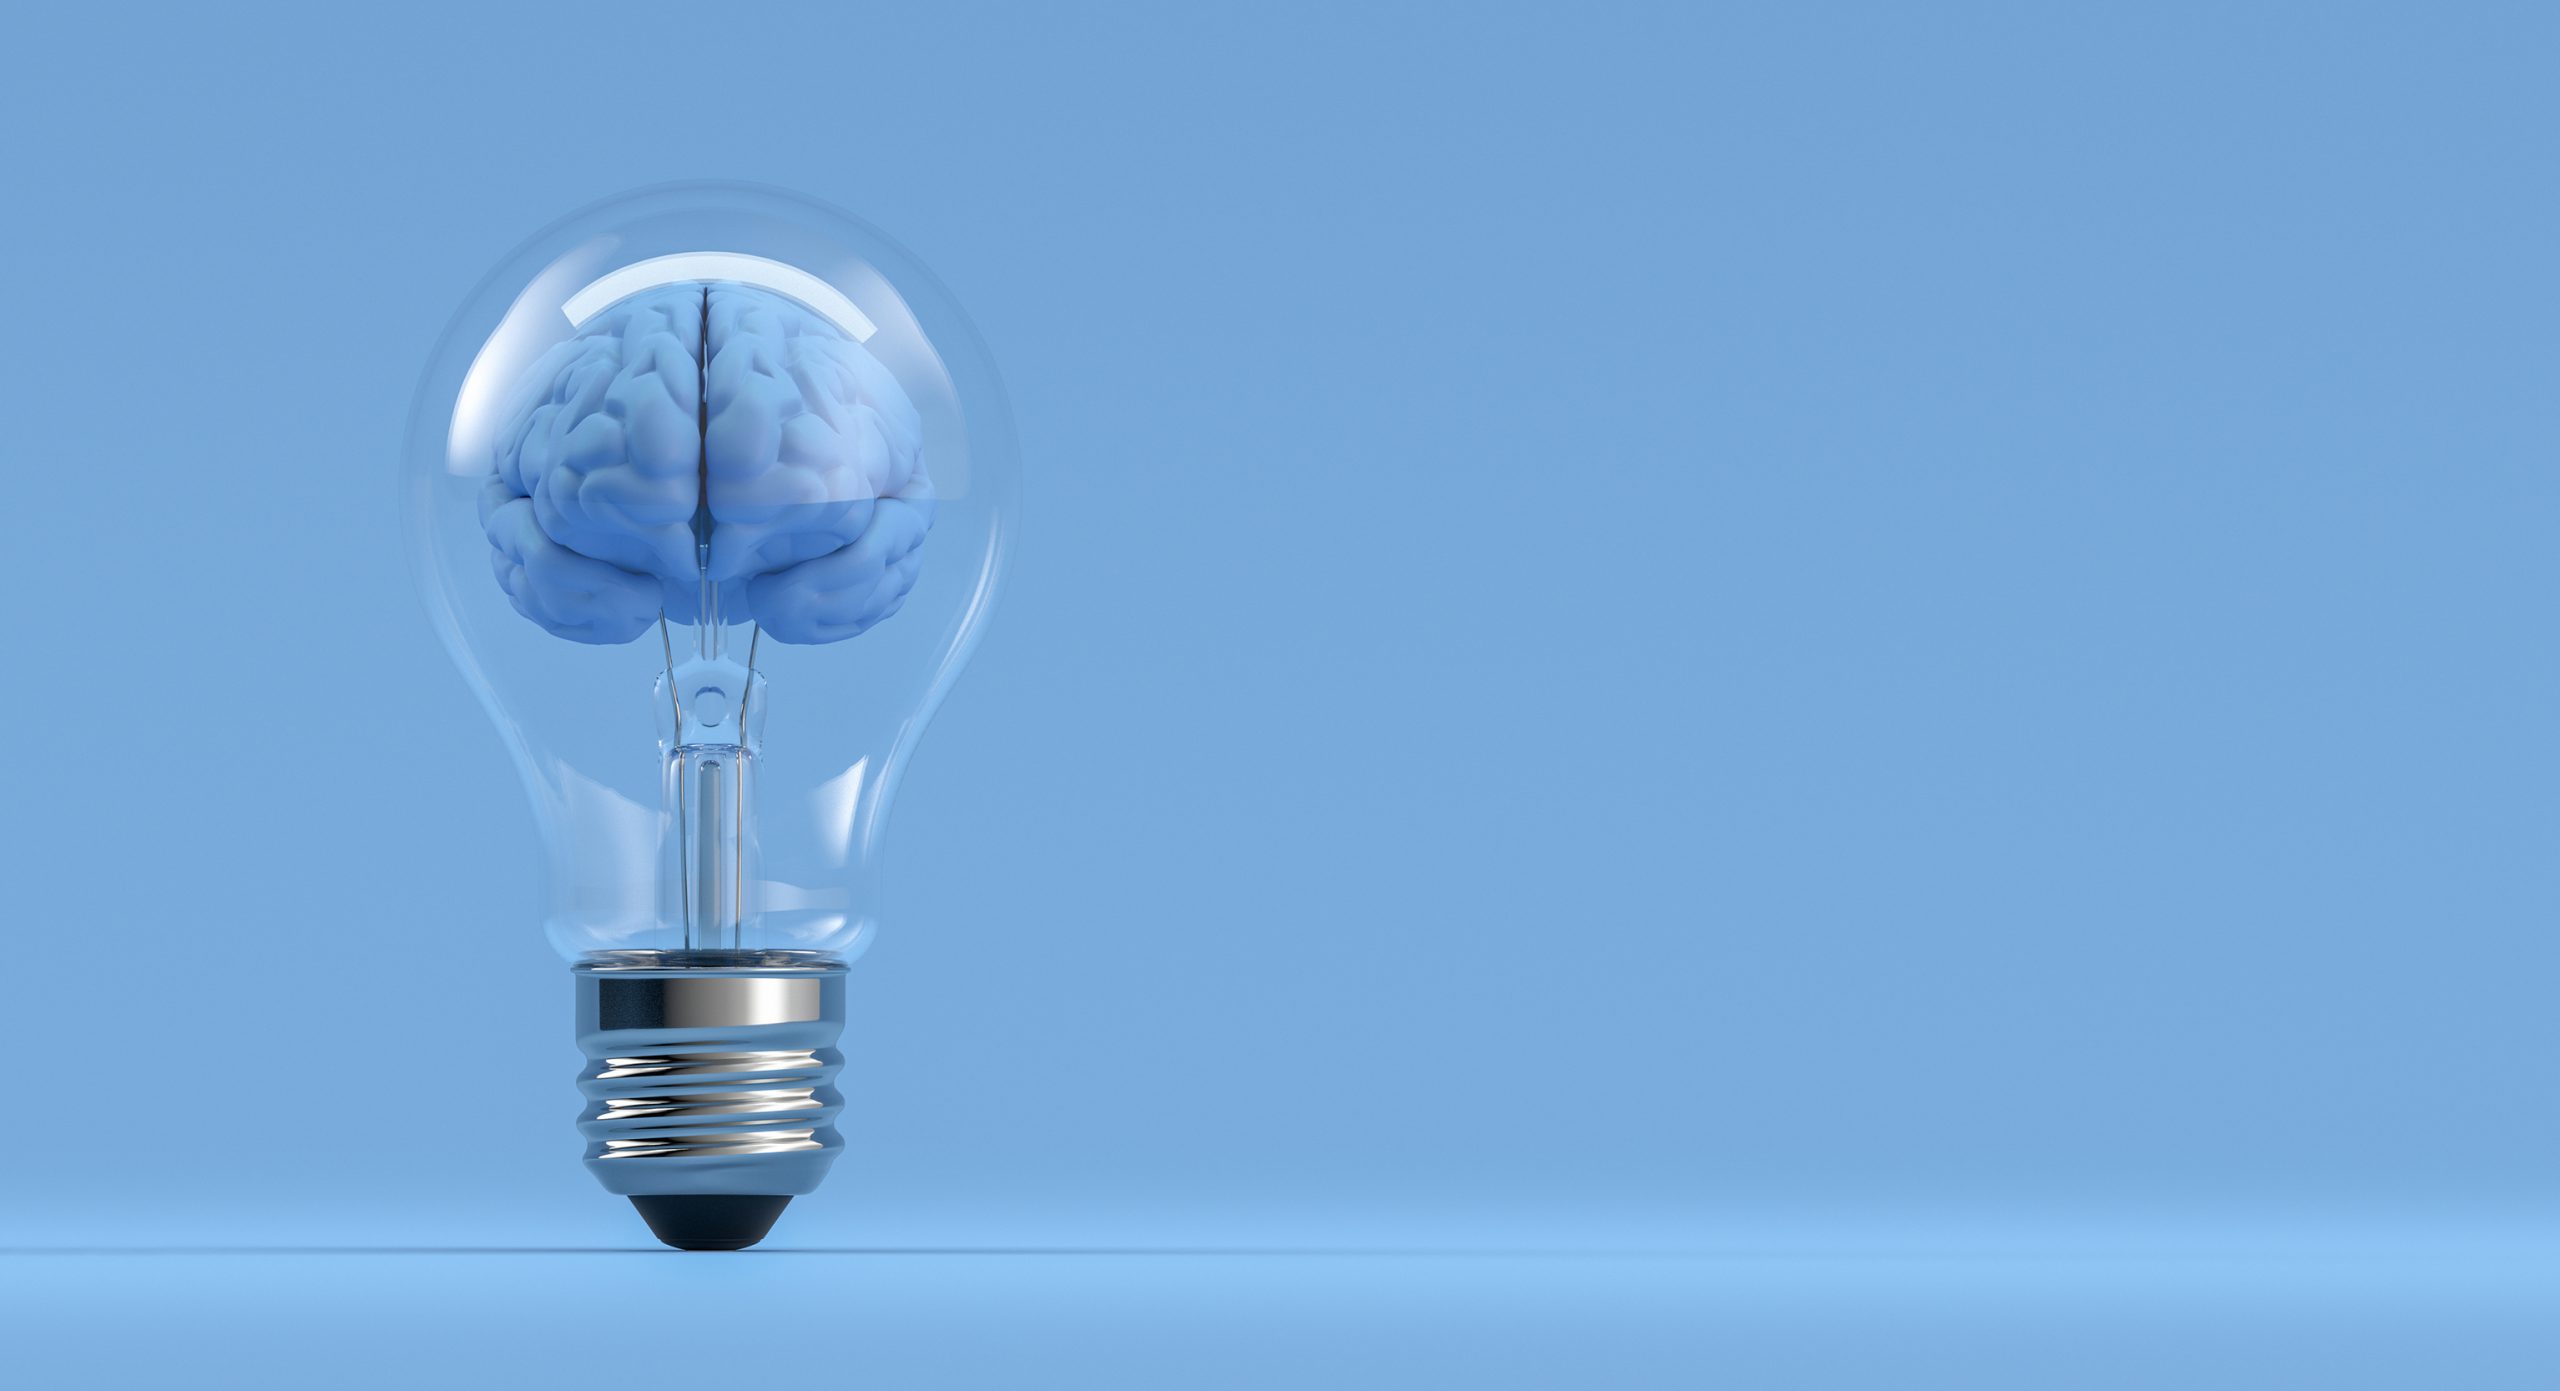 An image of a lightbulb with a brain inside against a blue background.